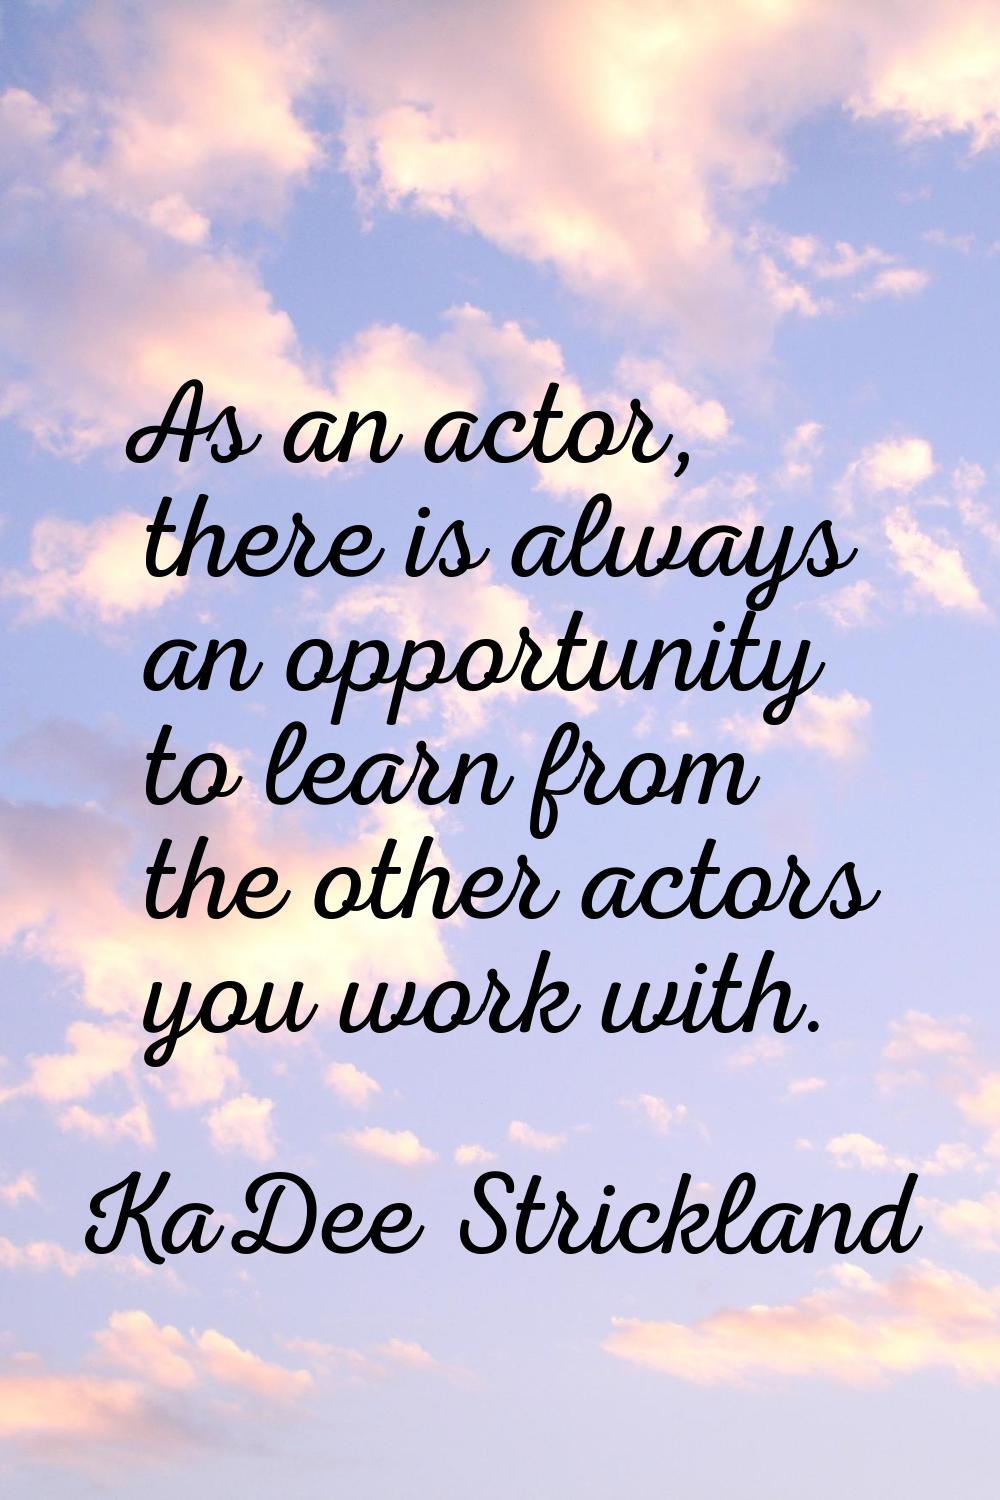 As an actor, there is always an opportunity to learn from the other actors you work with.